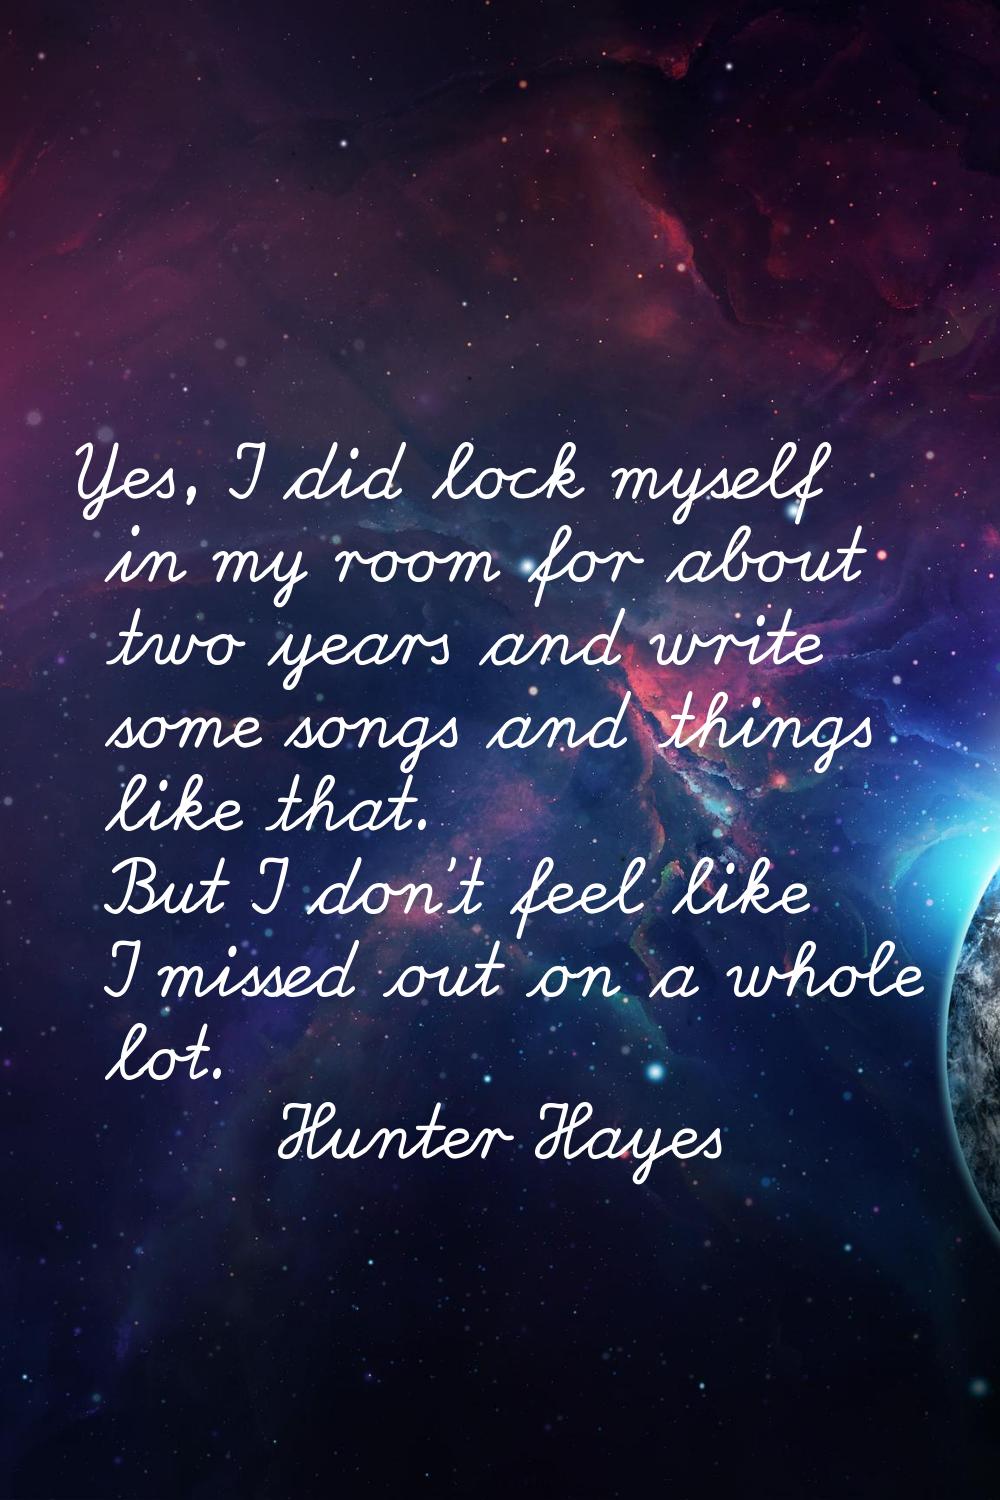 Yes, I did lock myself in my room for about two years and write some songs and things like that. Bu